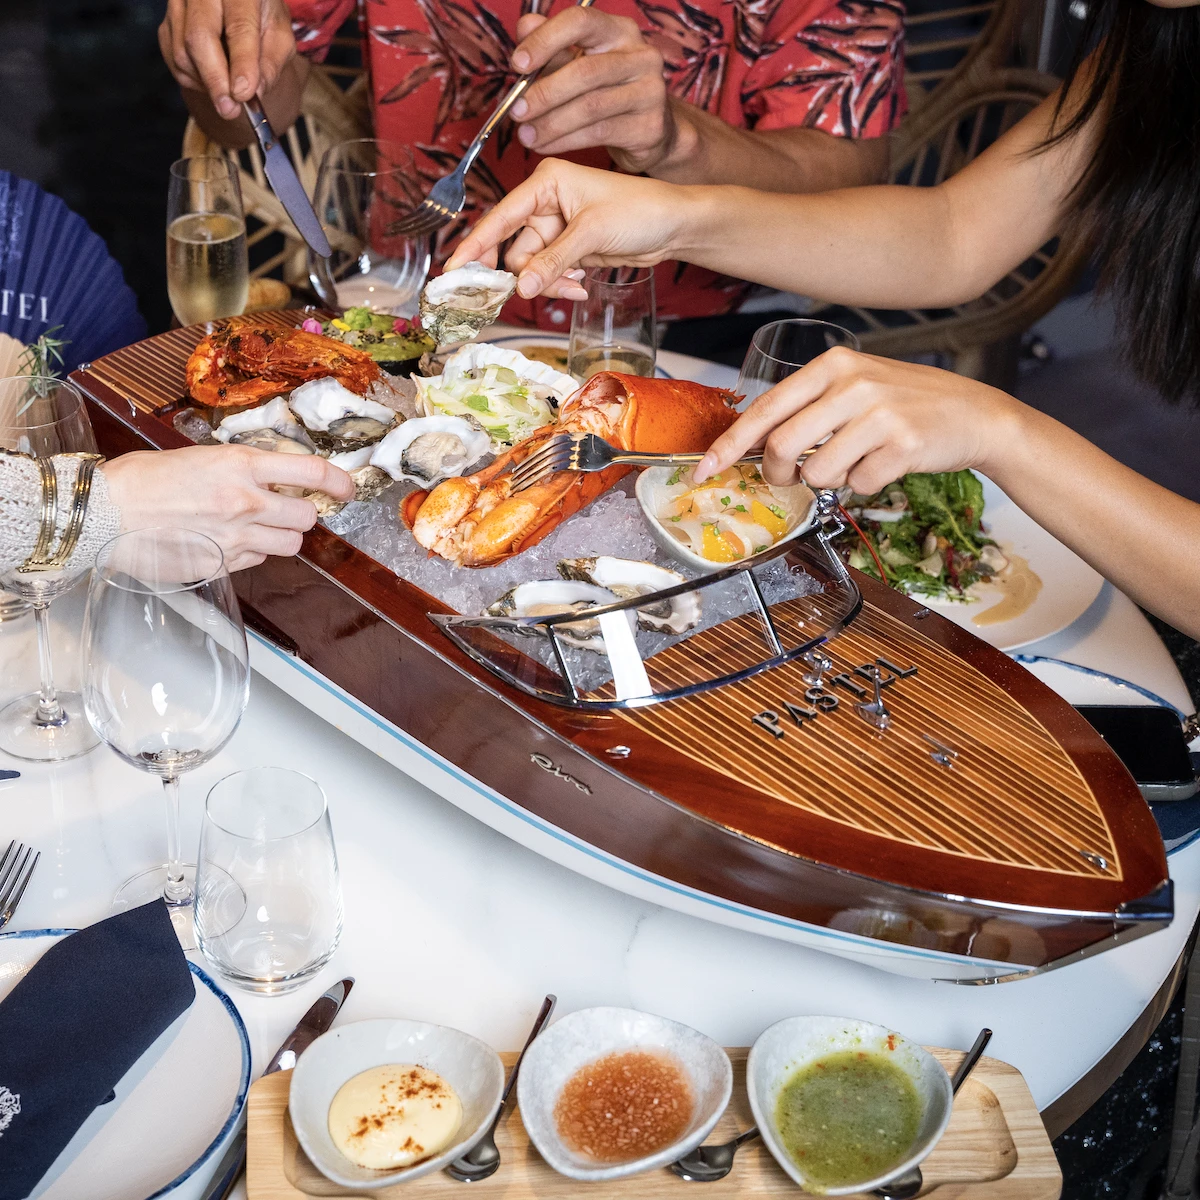 People grabbing food from Pastel Bangkok seafood yacht with knives and forks.